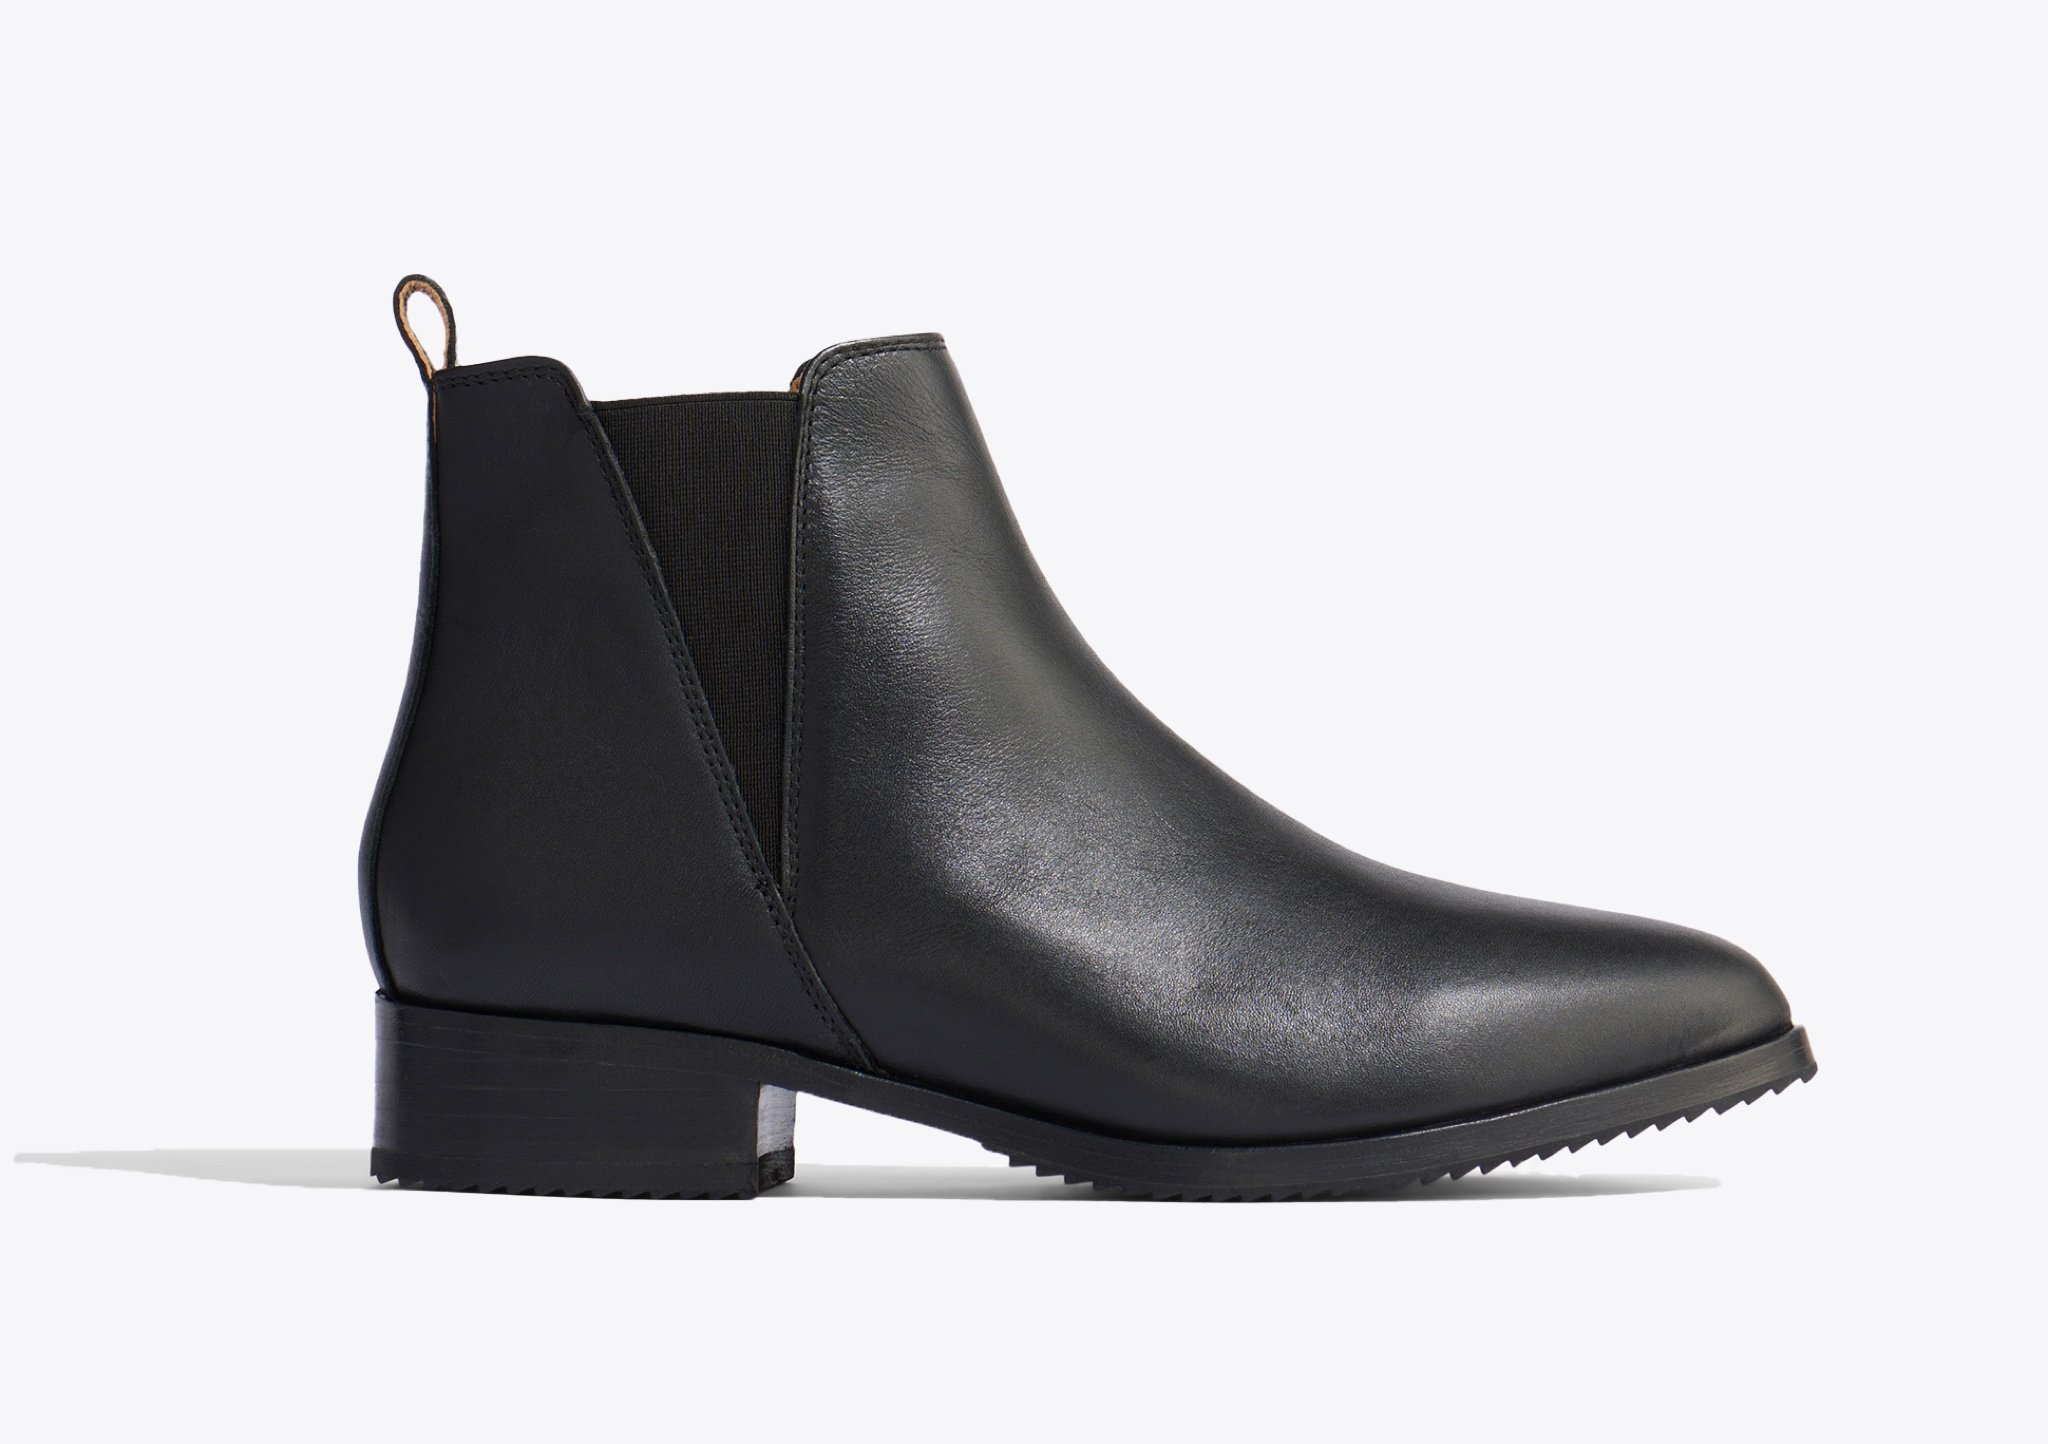 Nisolo Eva Everyday Chelsea Boot Black/Black - Every Nisolo product is built on the foundation of comfort, function, and design. 